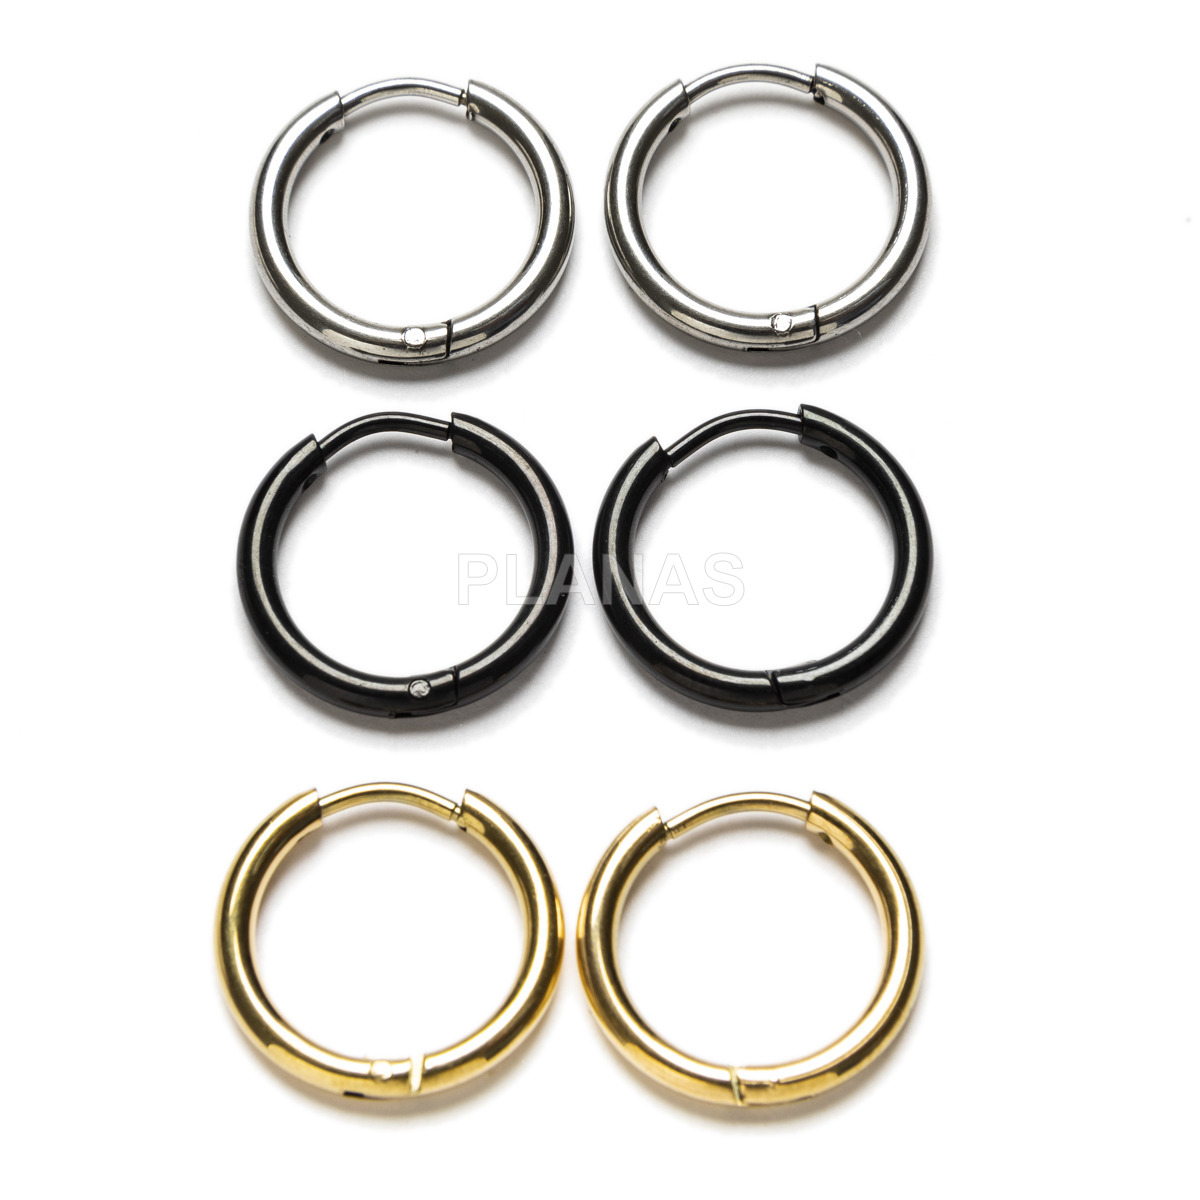 Rings in stainless steel 304 with a thickness of 2.5mm. 2.5x13mm.